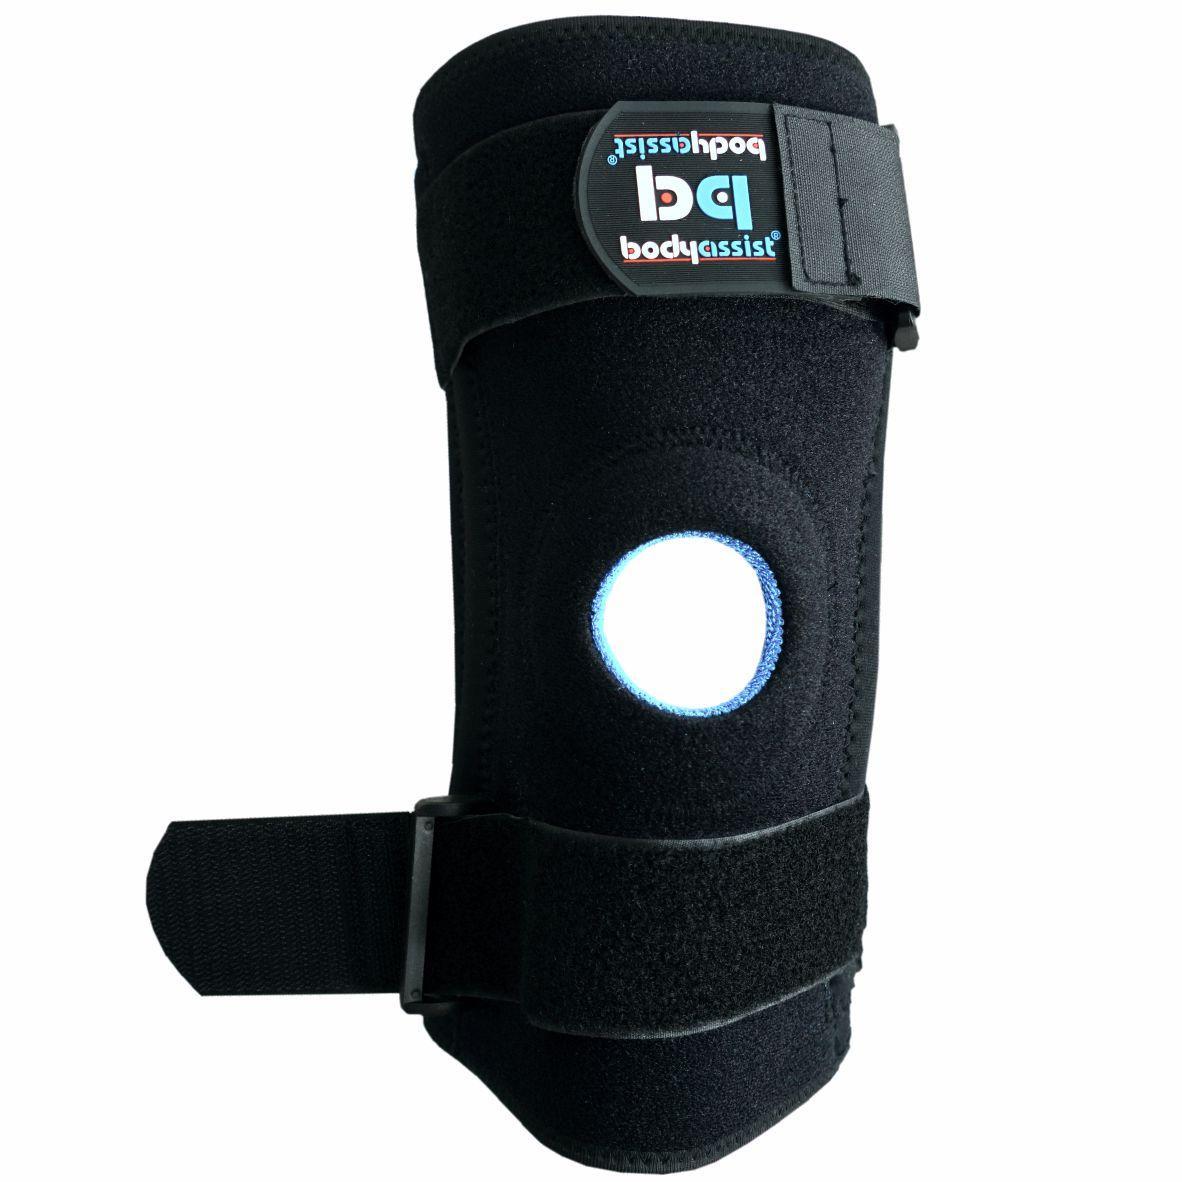 Bodyassist Patella Knee Support Brace with Stays BLACK LARGE